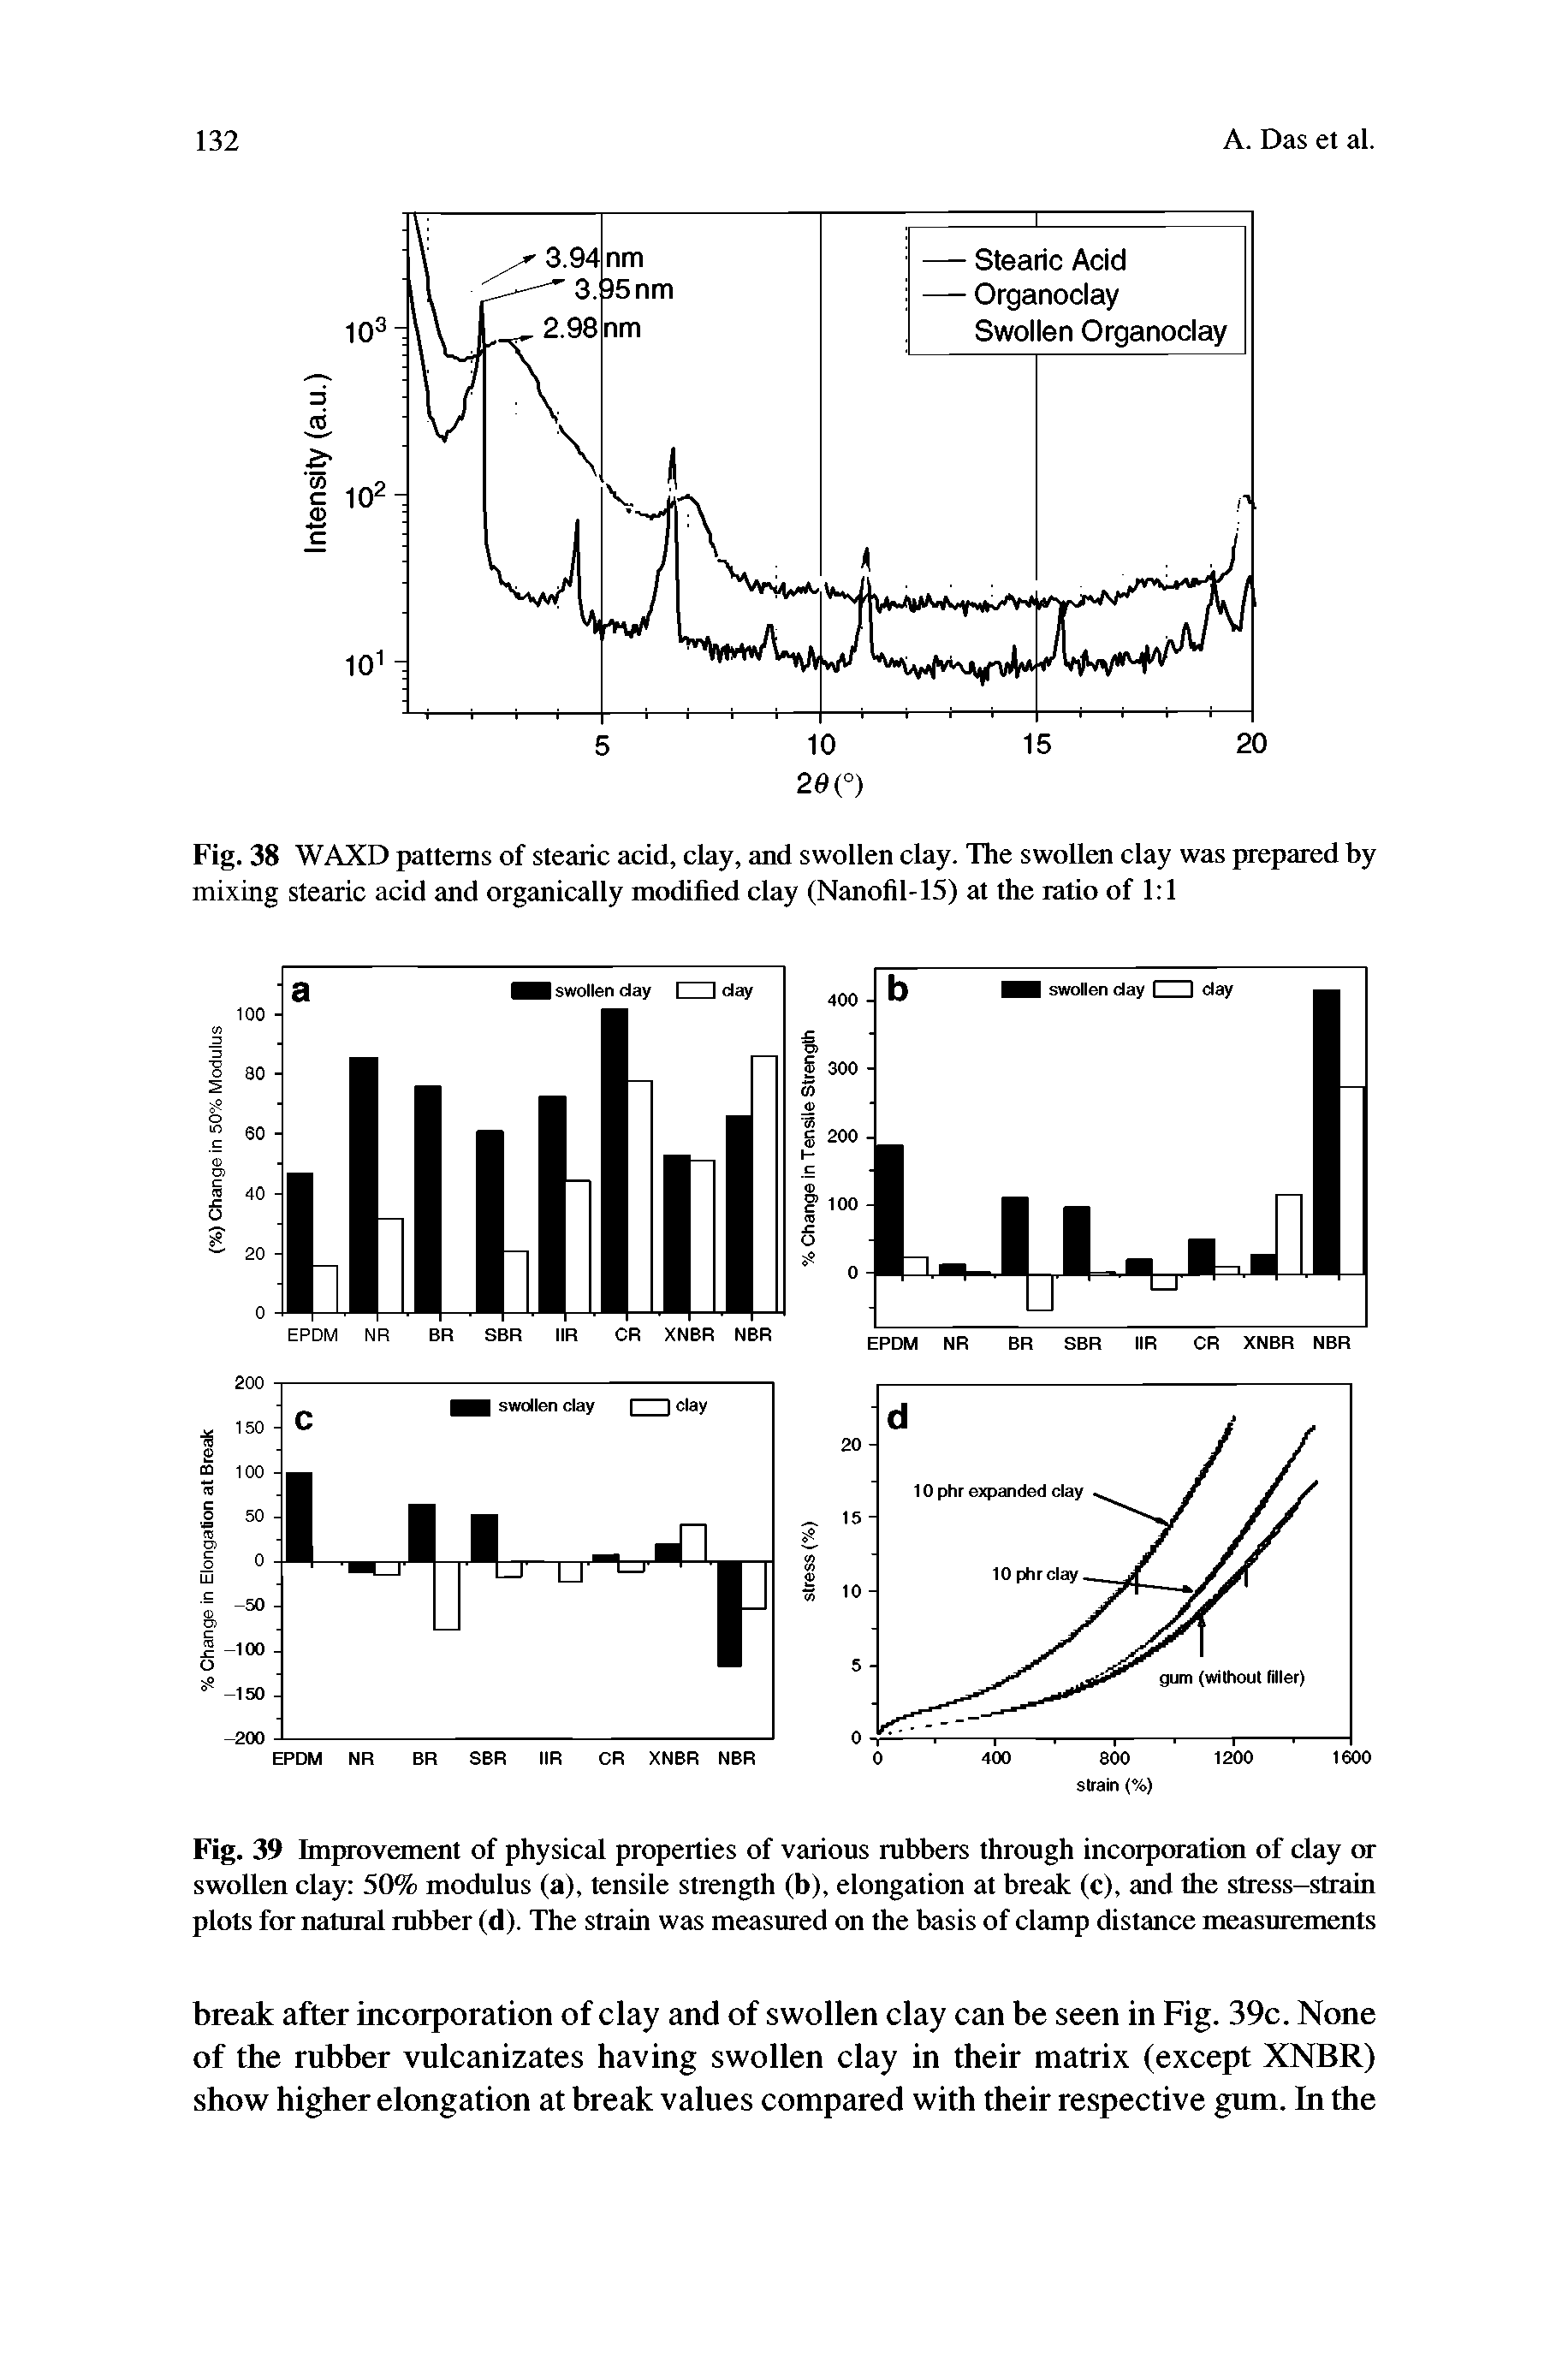 Fig. 38 WAXD patterns of stearic acid, clay, and swollen clay. The swollen clay was prepared by mixing stearic acid and organically modified clay (Nanofil-15) at the ratio of 1 1...